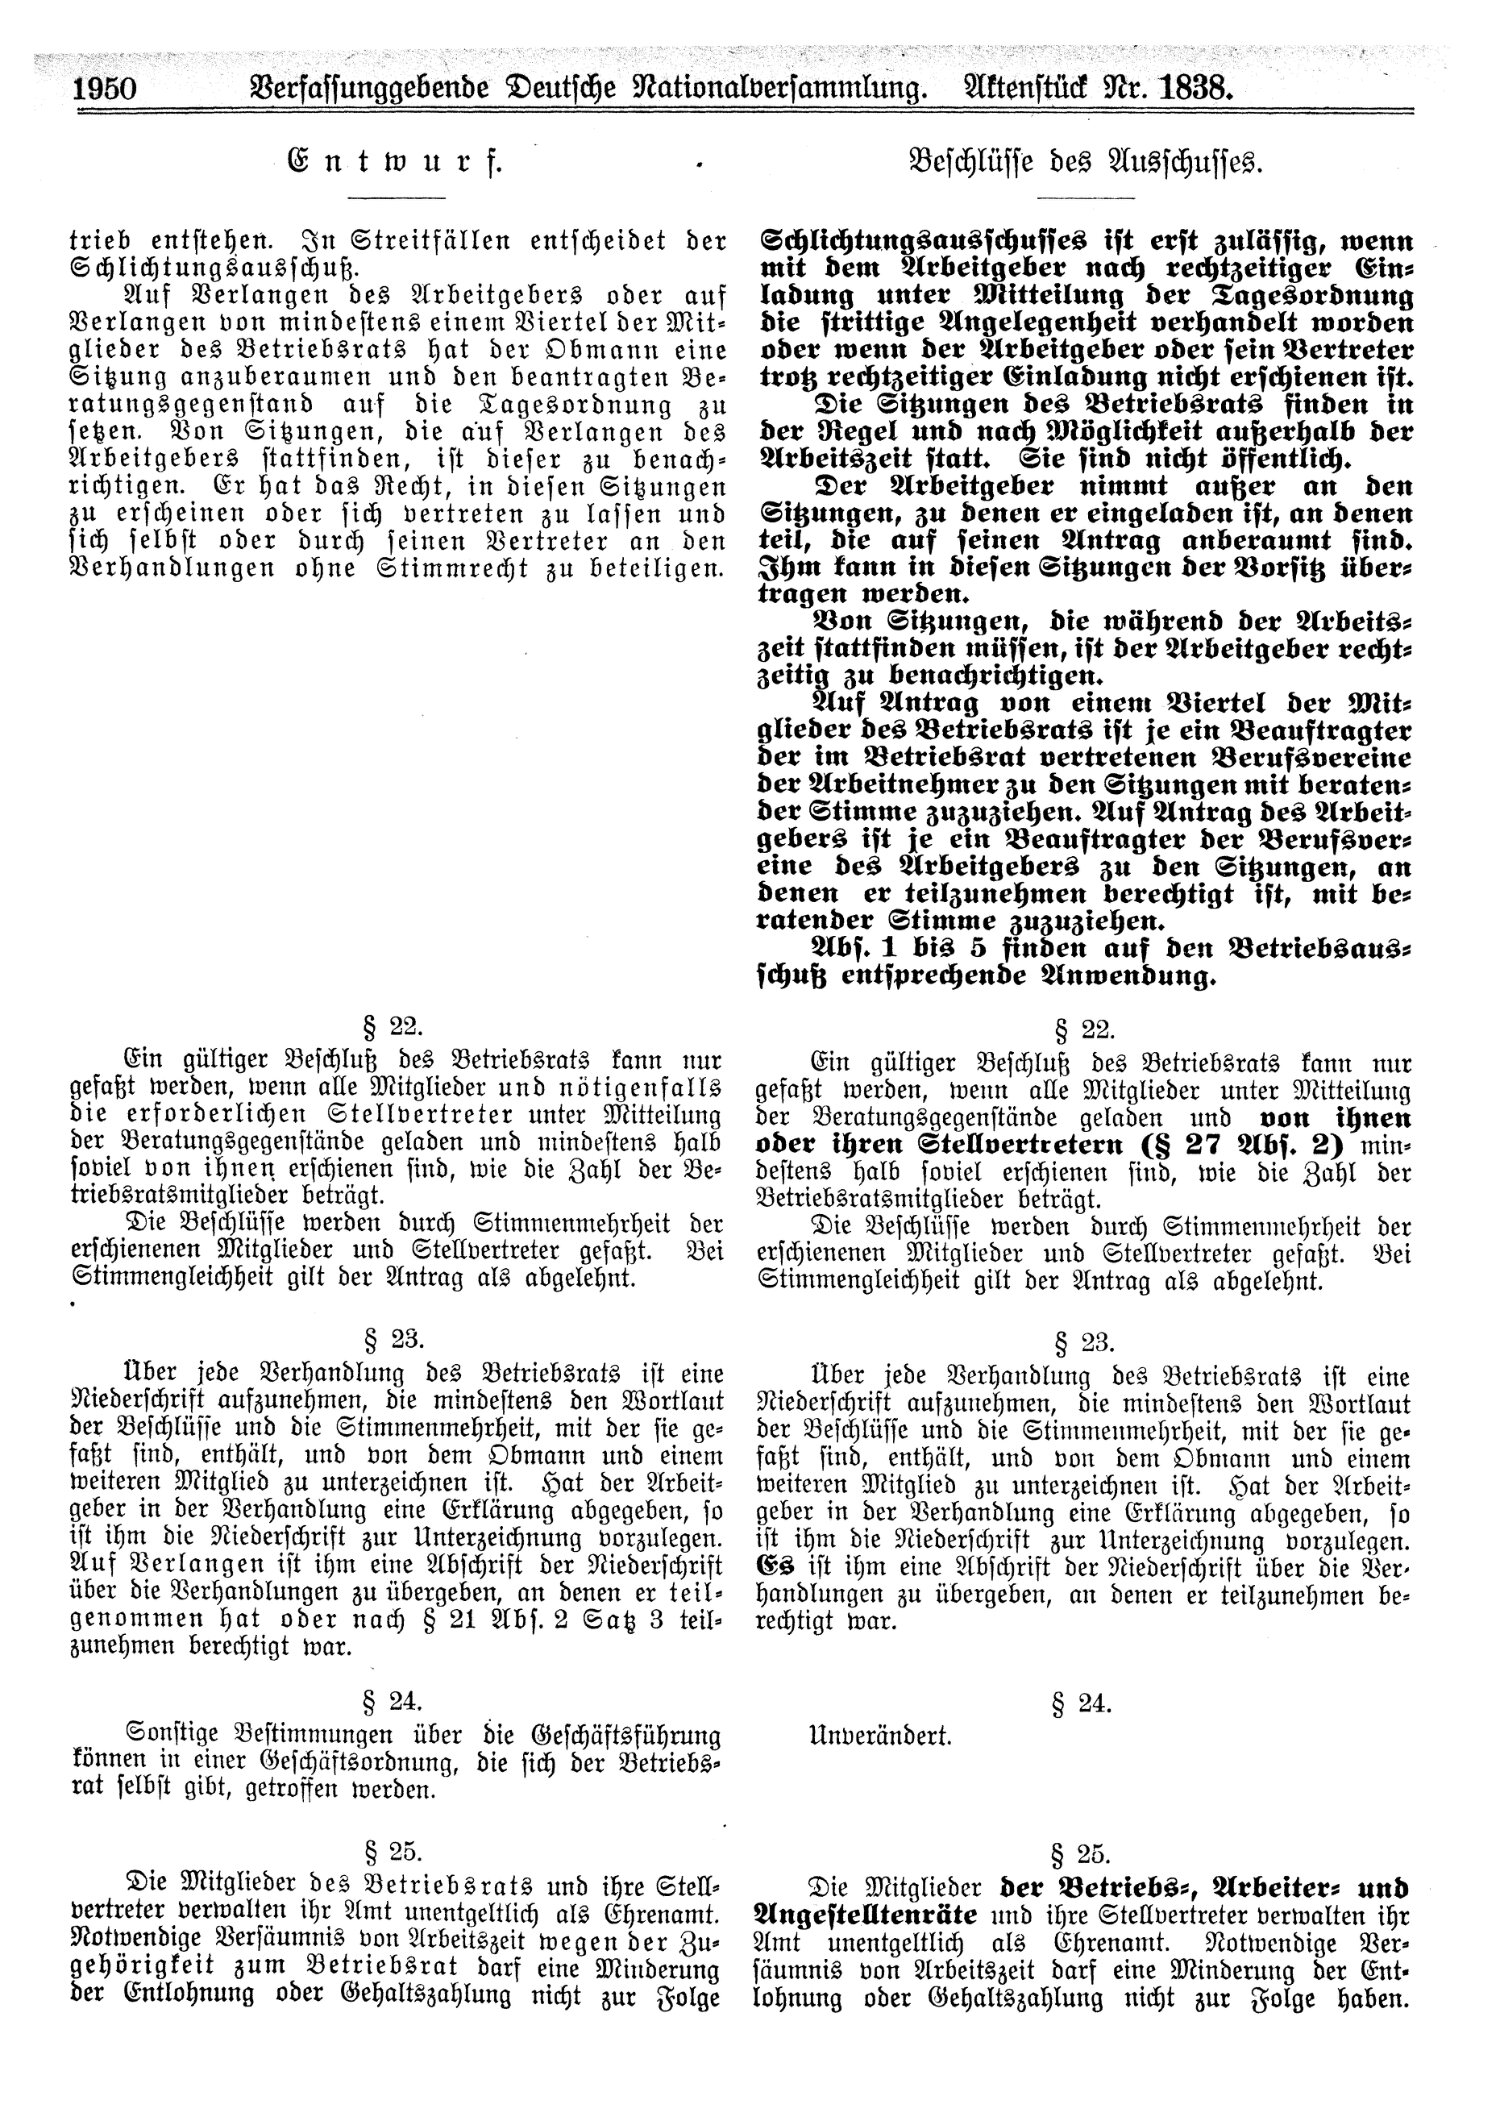 Scan of page 1950